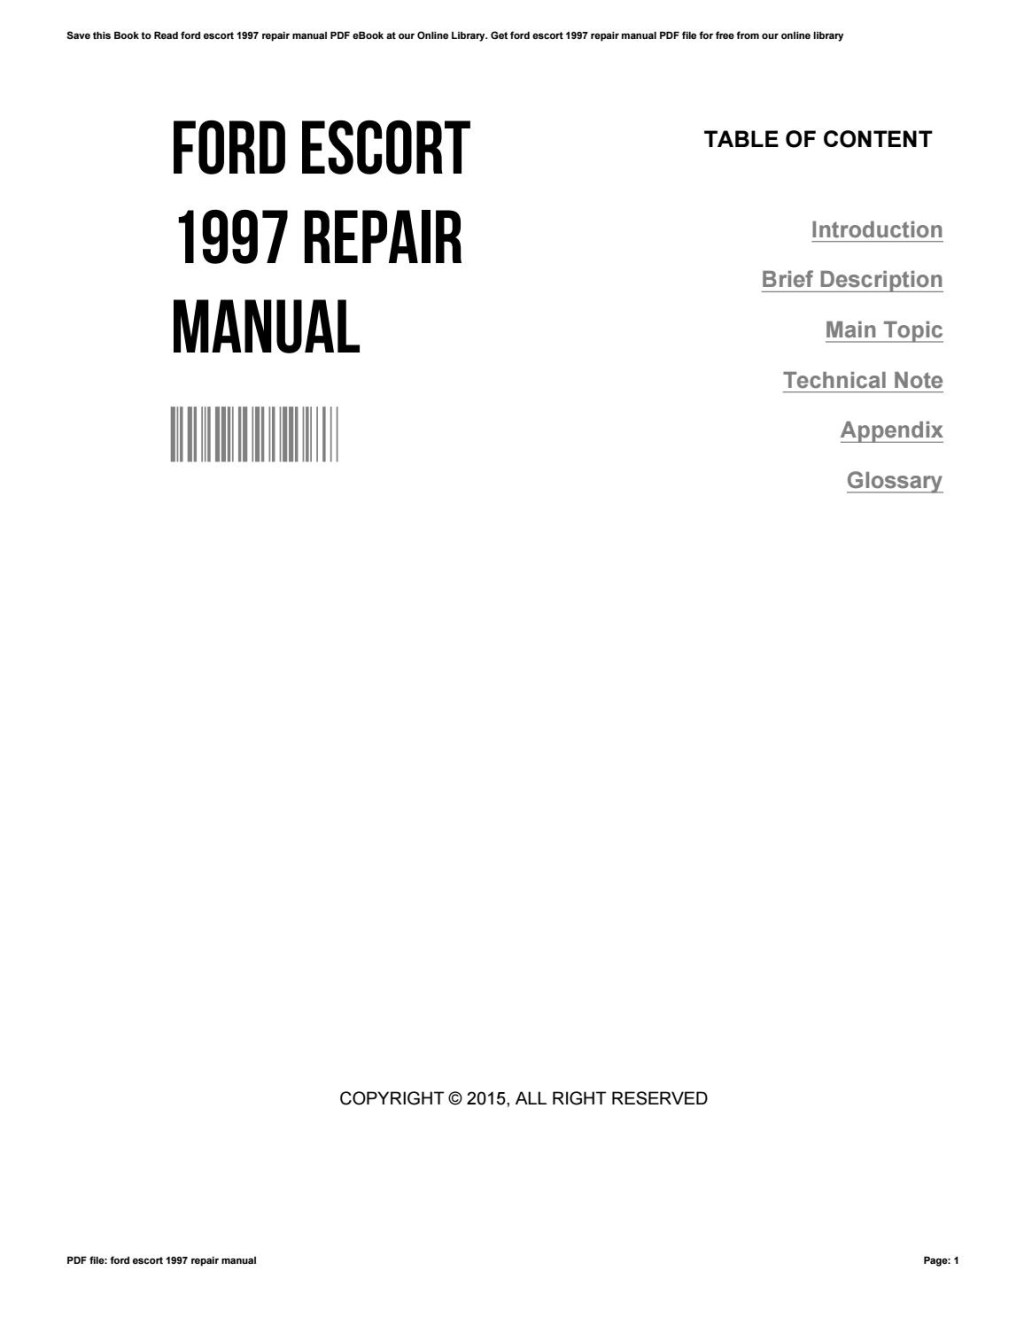 Picture of: Ford escort  repair manual by RobertHall – Issuu